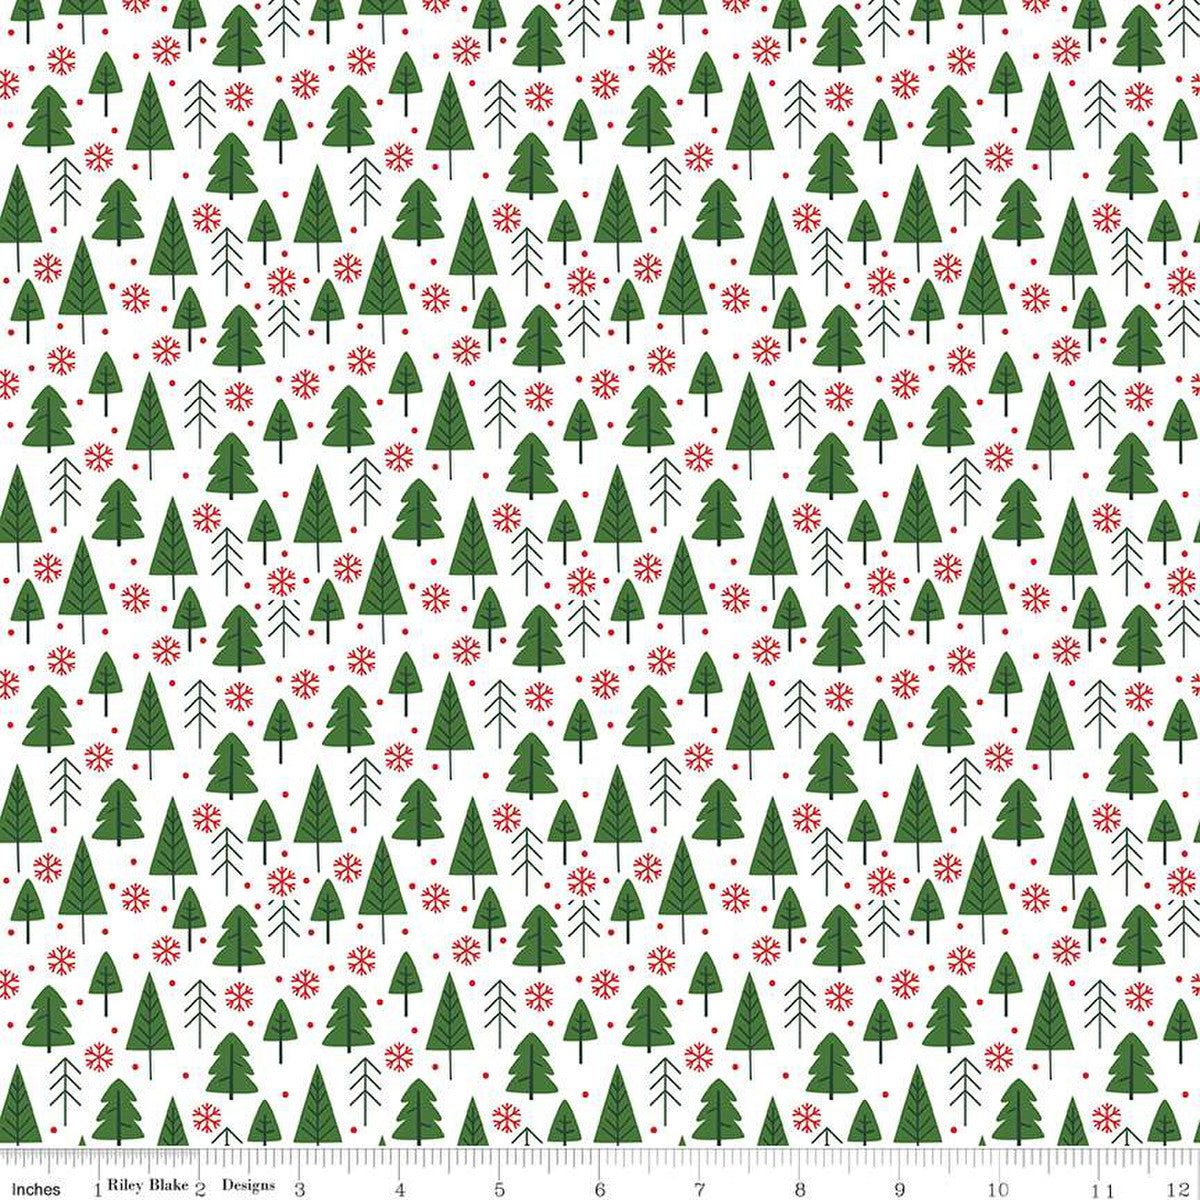 This print features pine trees, dots, and snowflakes.